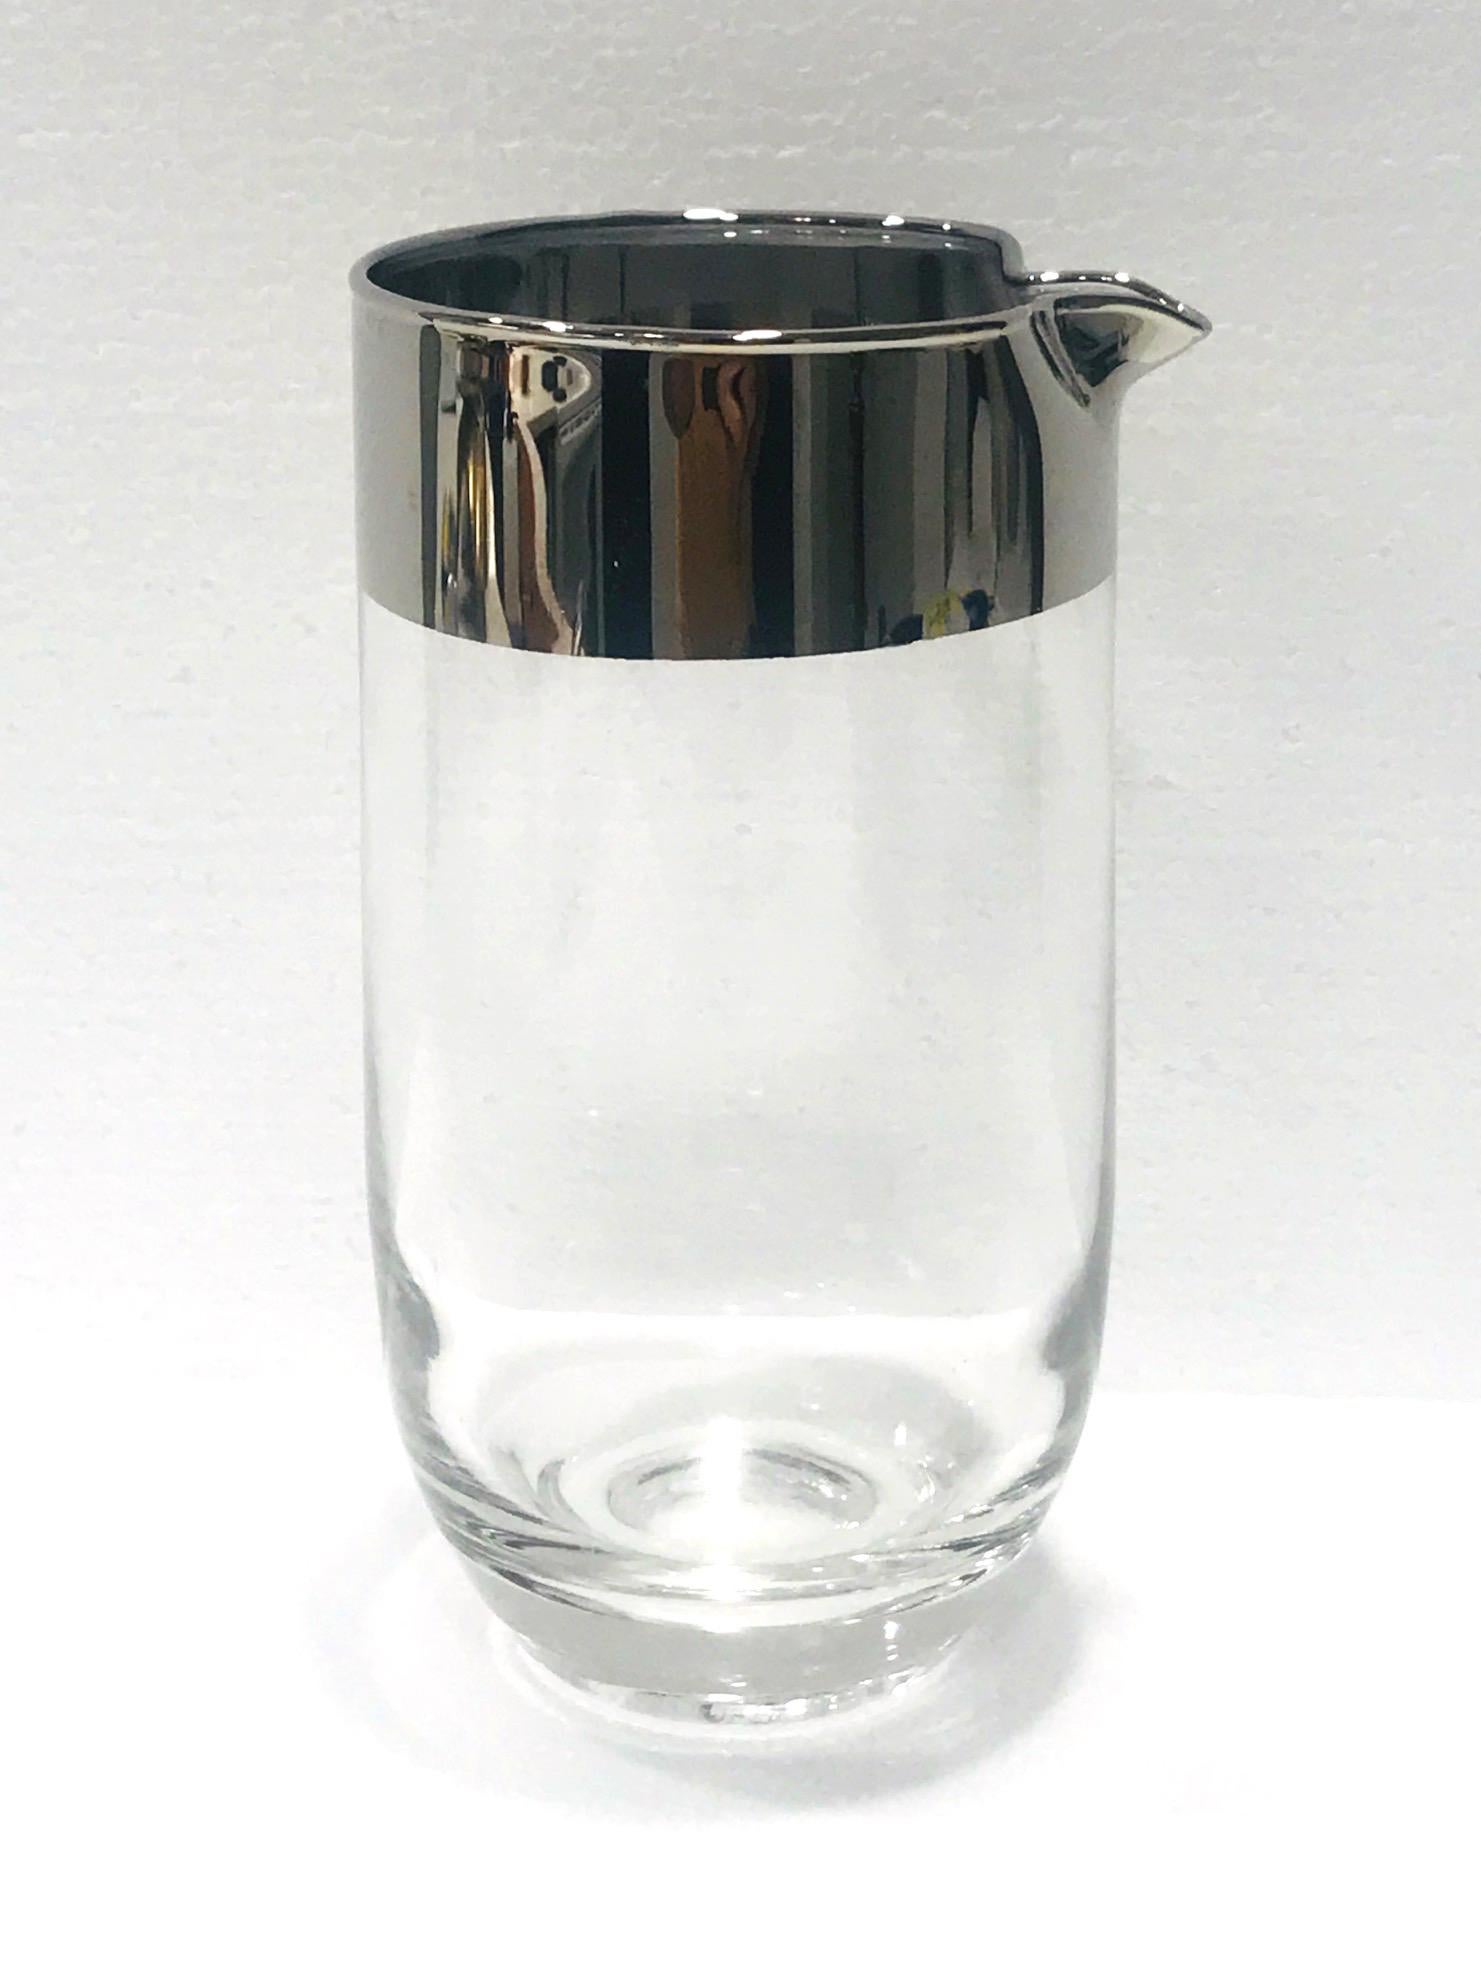 Mid-Century Modern cocktail shaker or carafe by Dorothy Thorpe, known for her iconic barware designs, circa 1960. The glass cocktail mixer has a minimalist design featuring a striking silver overlay rim and a tapered base.
The pitcher has a